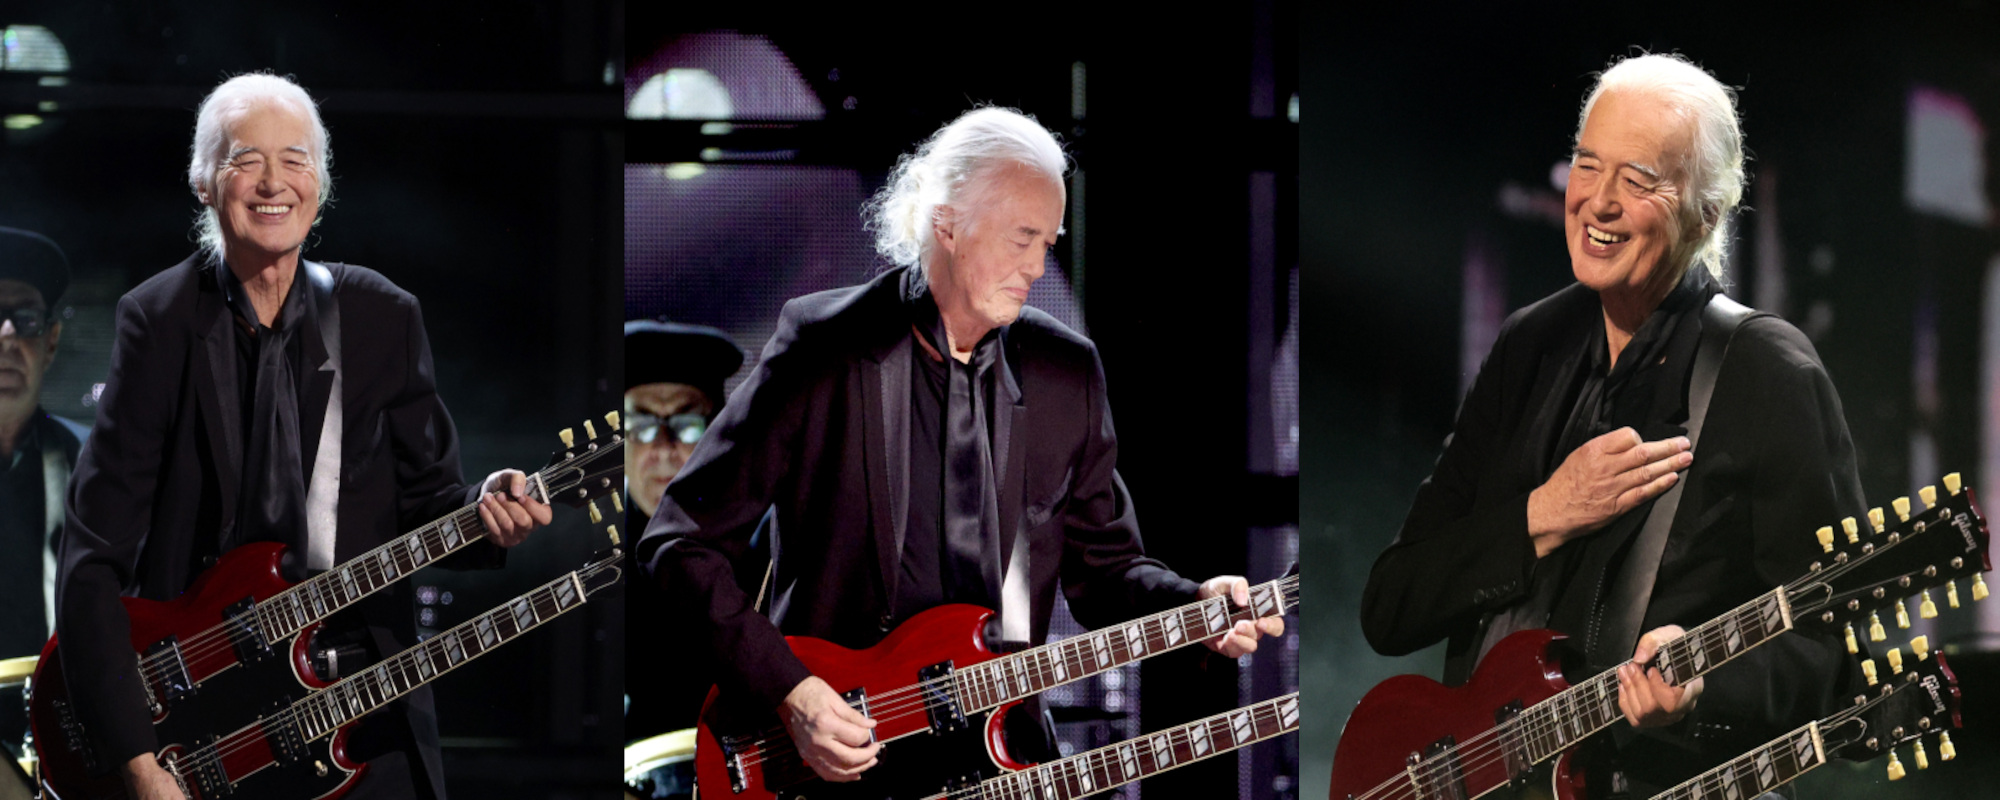 Watch: Jimmy Page Pays Tribute to Link Wray with Surprise Performance of “Rumble” at the Rock & Roll Hall of Fame Induction Ceremony